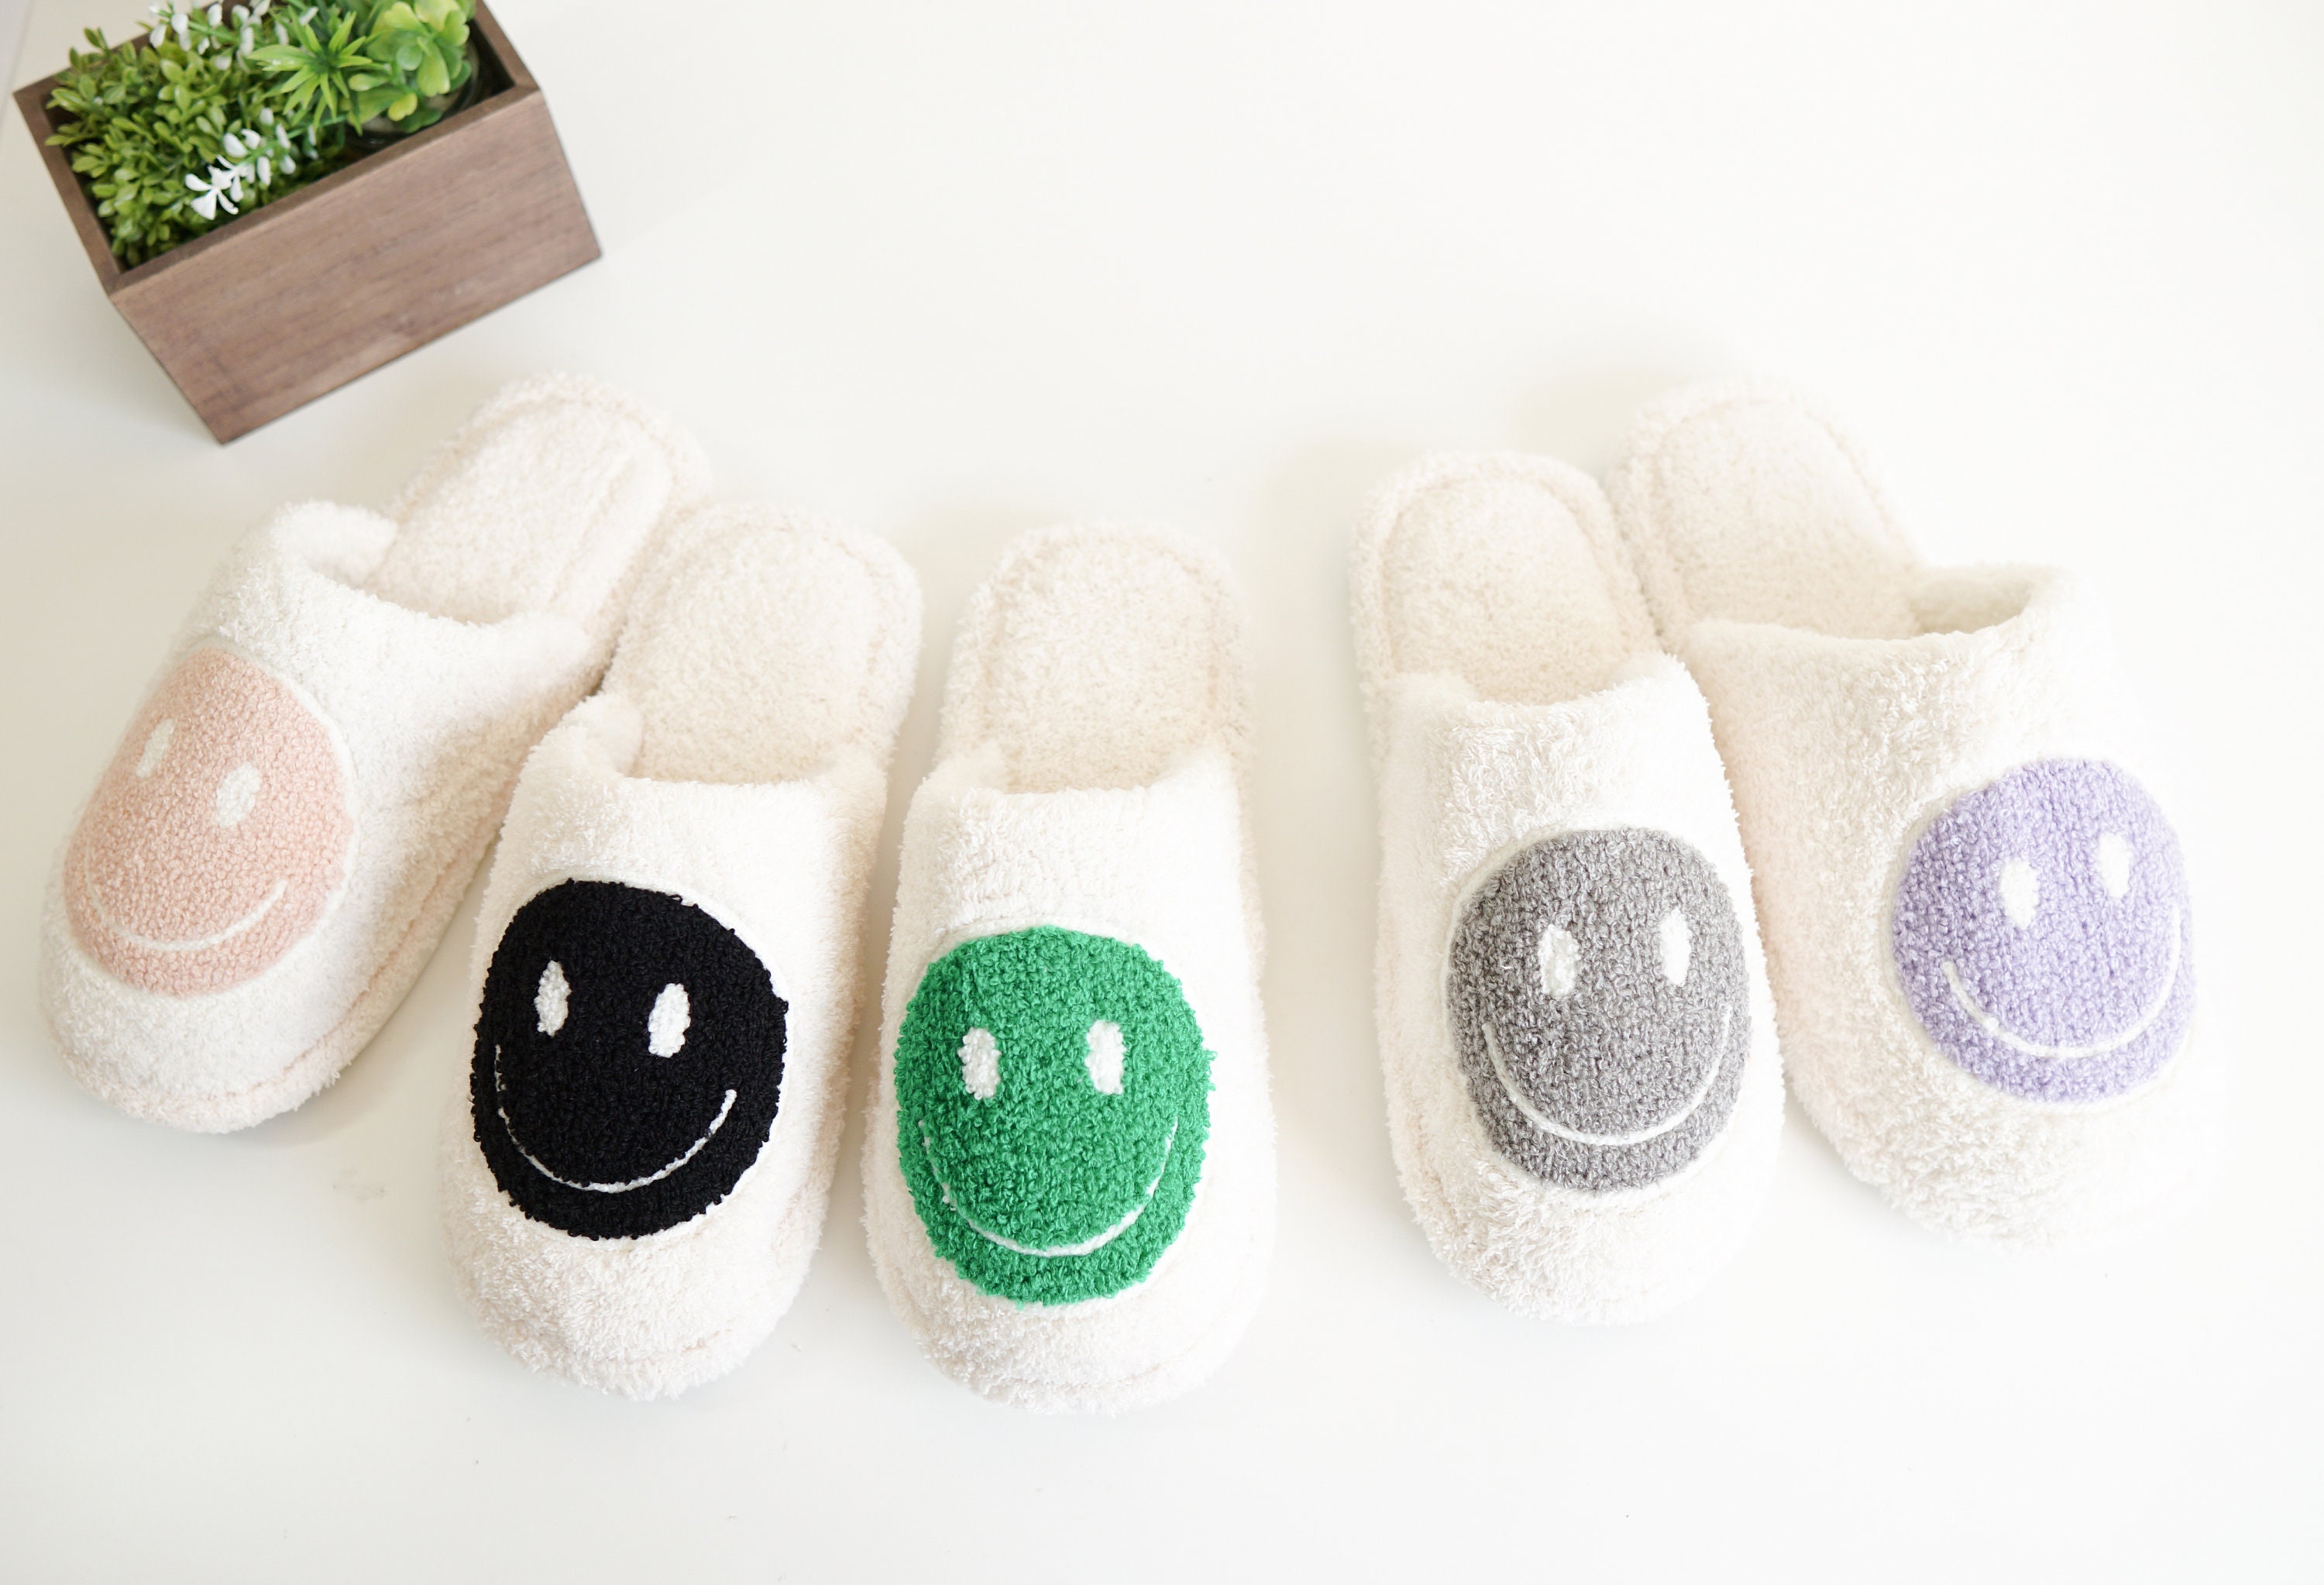 Chaussons smiley 1 – Cheriedoudou